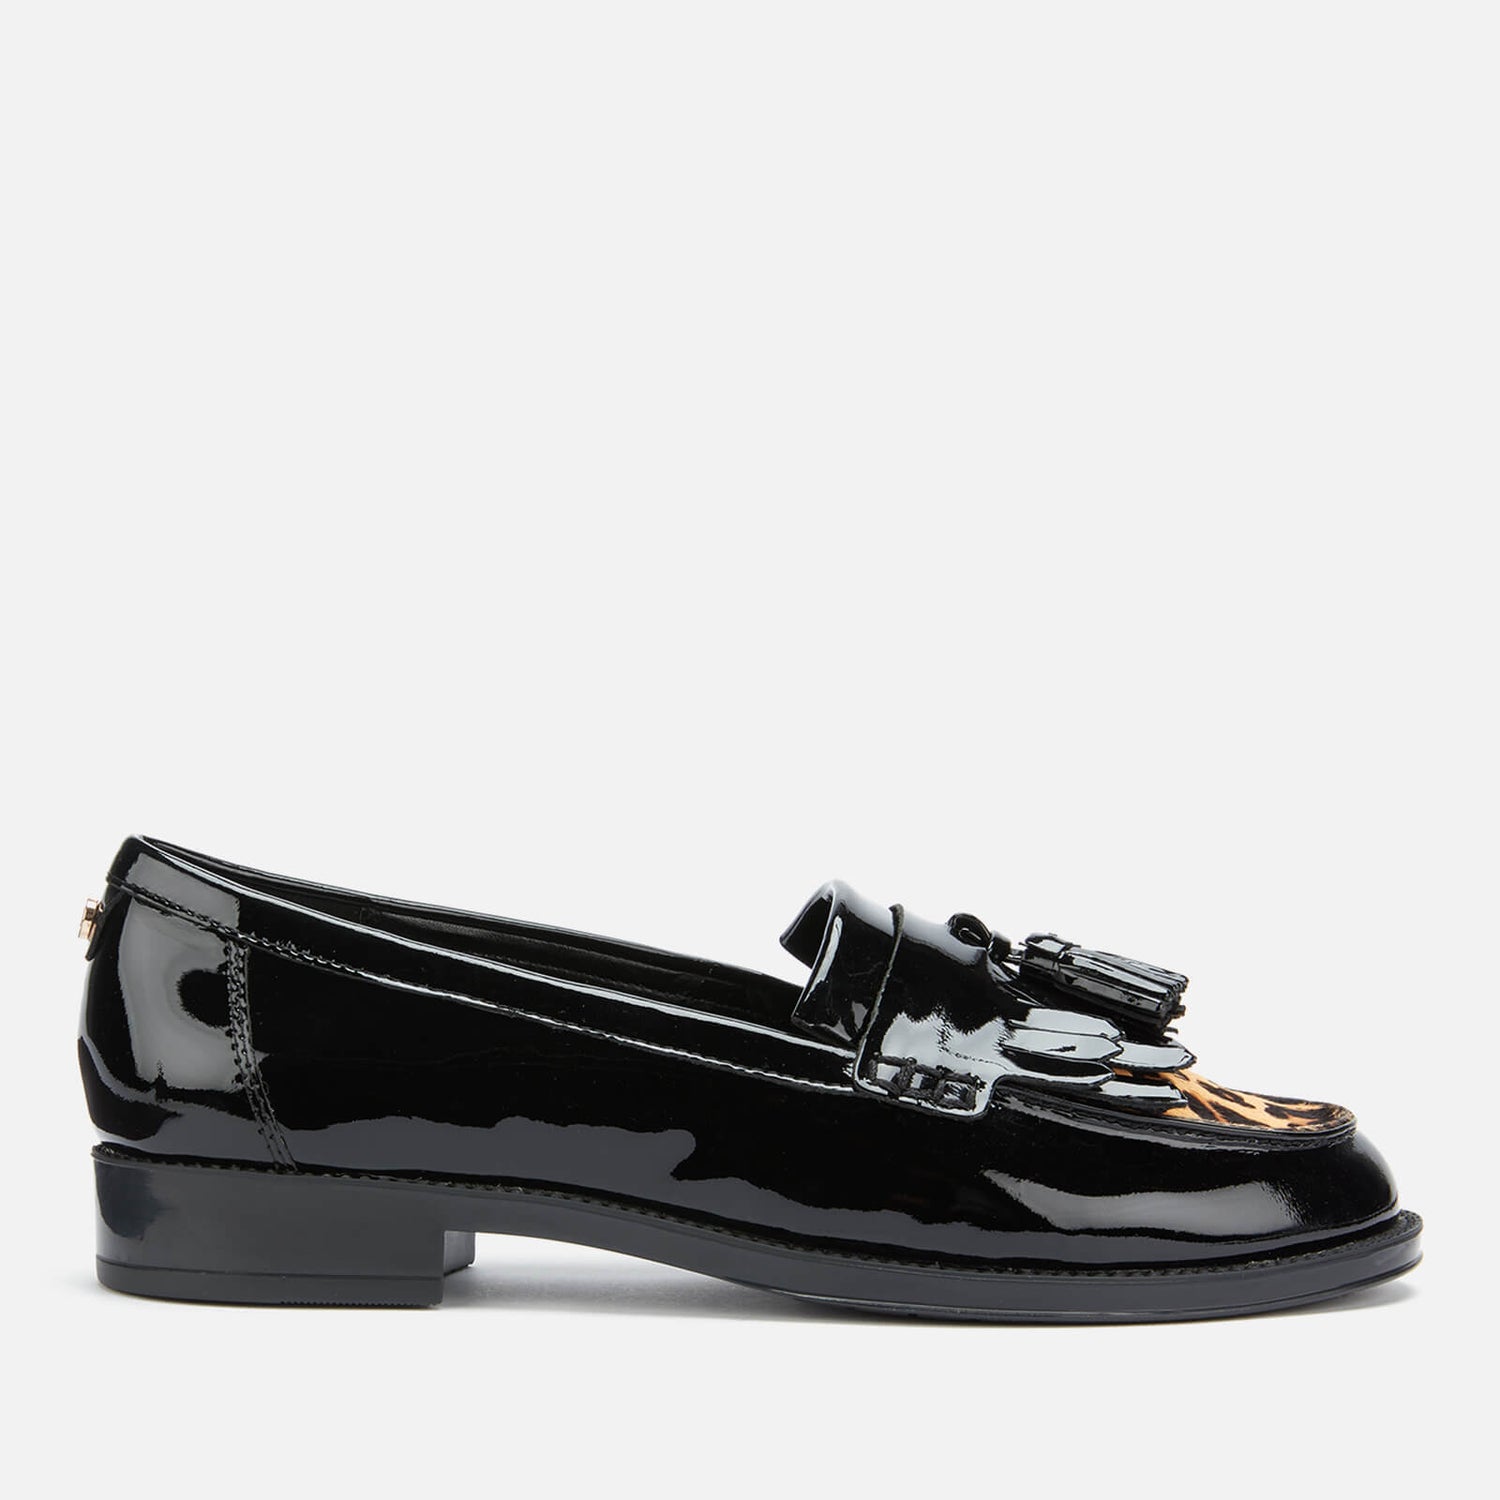 Dune Women's Greatly Leather Loafers - Black | TheHut.com